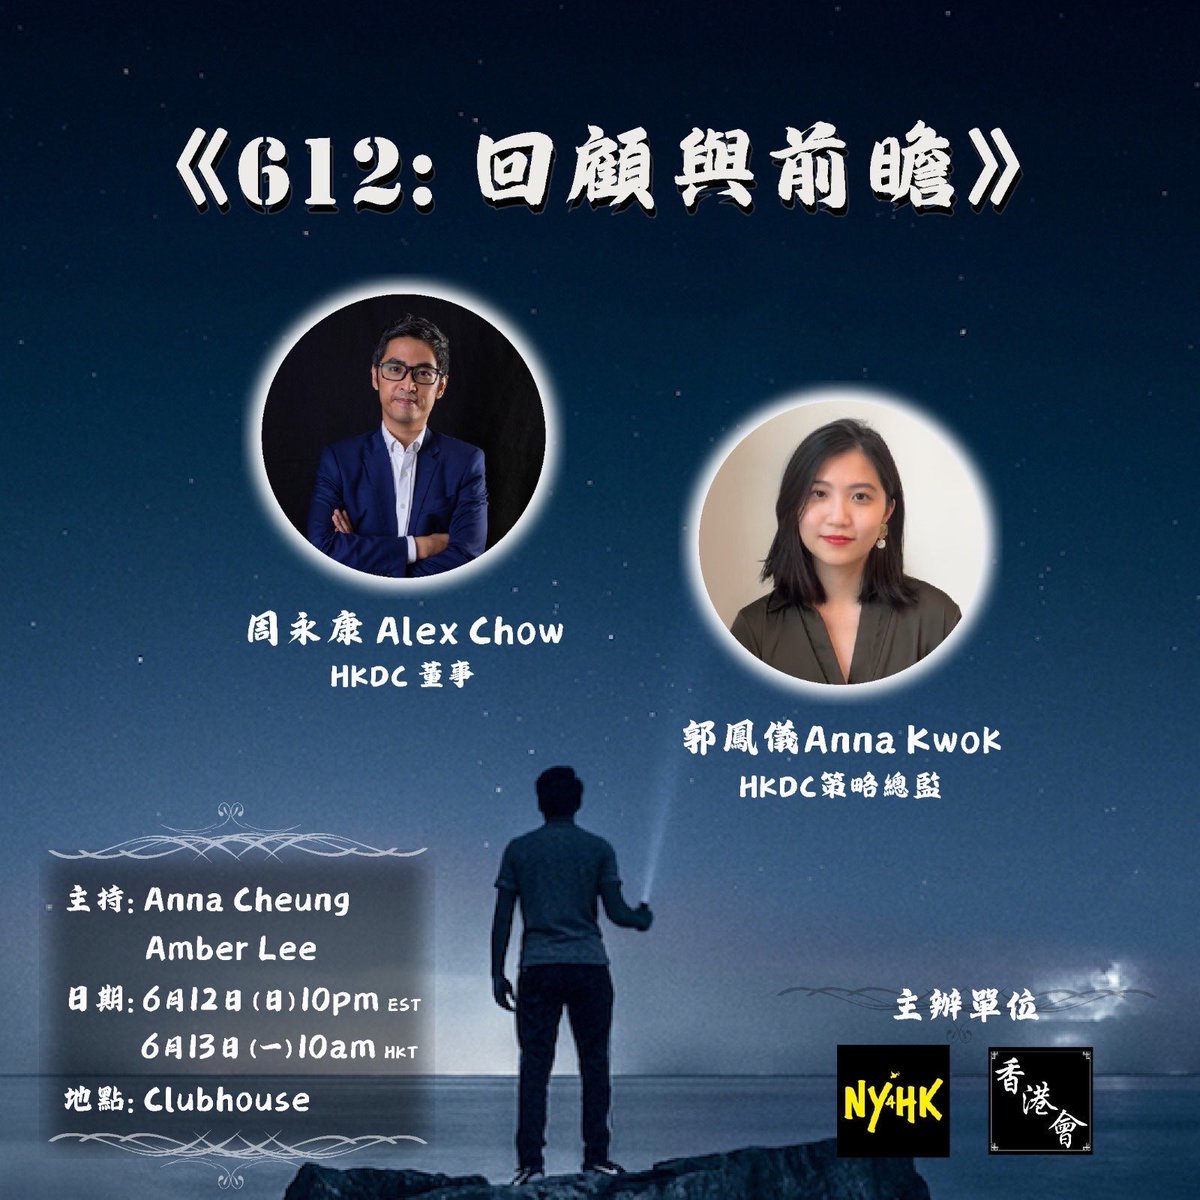 612 #Clubhouse event, download the app and you can listen! Sun 10 pm Eastern Time! clubhouse.com/event/MEwygzE0 《612: 回顧與前瞻》 主持: Anna Cheung, Amber Lee 嘉賓: 周永康 Alex Chow (@hkdc_us 董事) 郭鳳儀 Anna Kwok (@hkdc_us 策略總監)